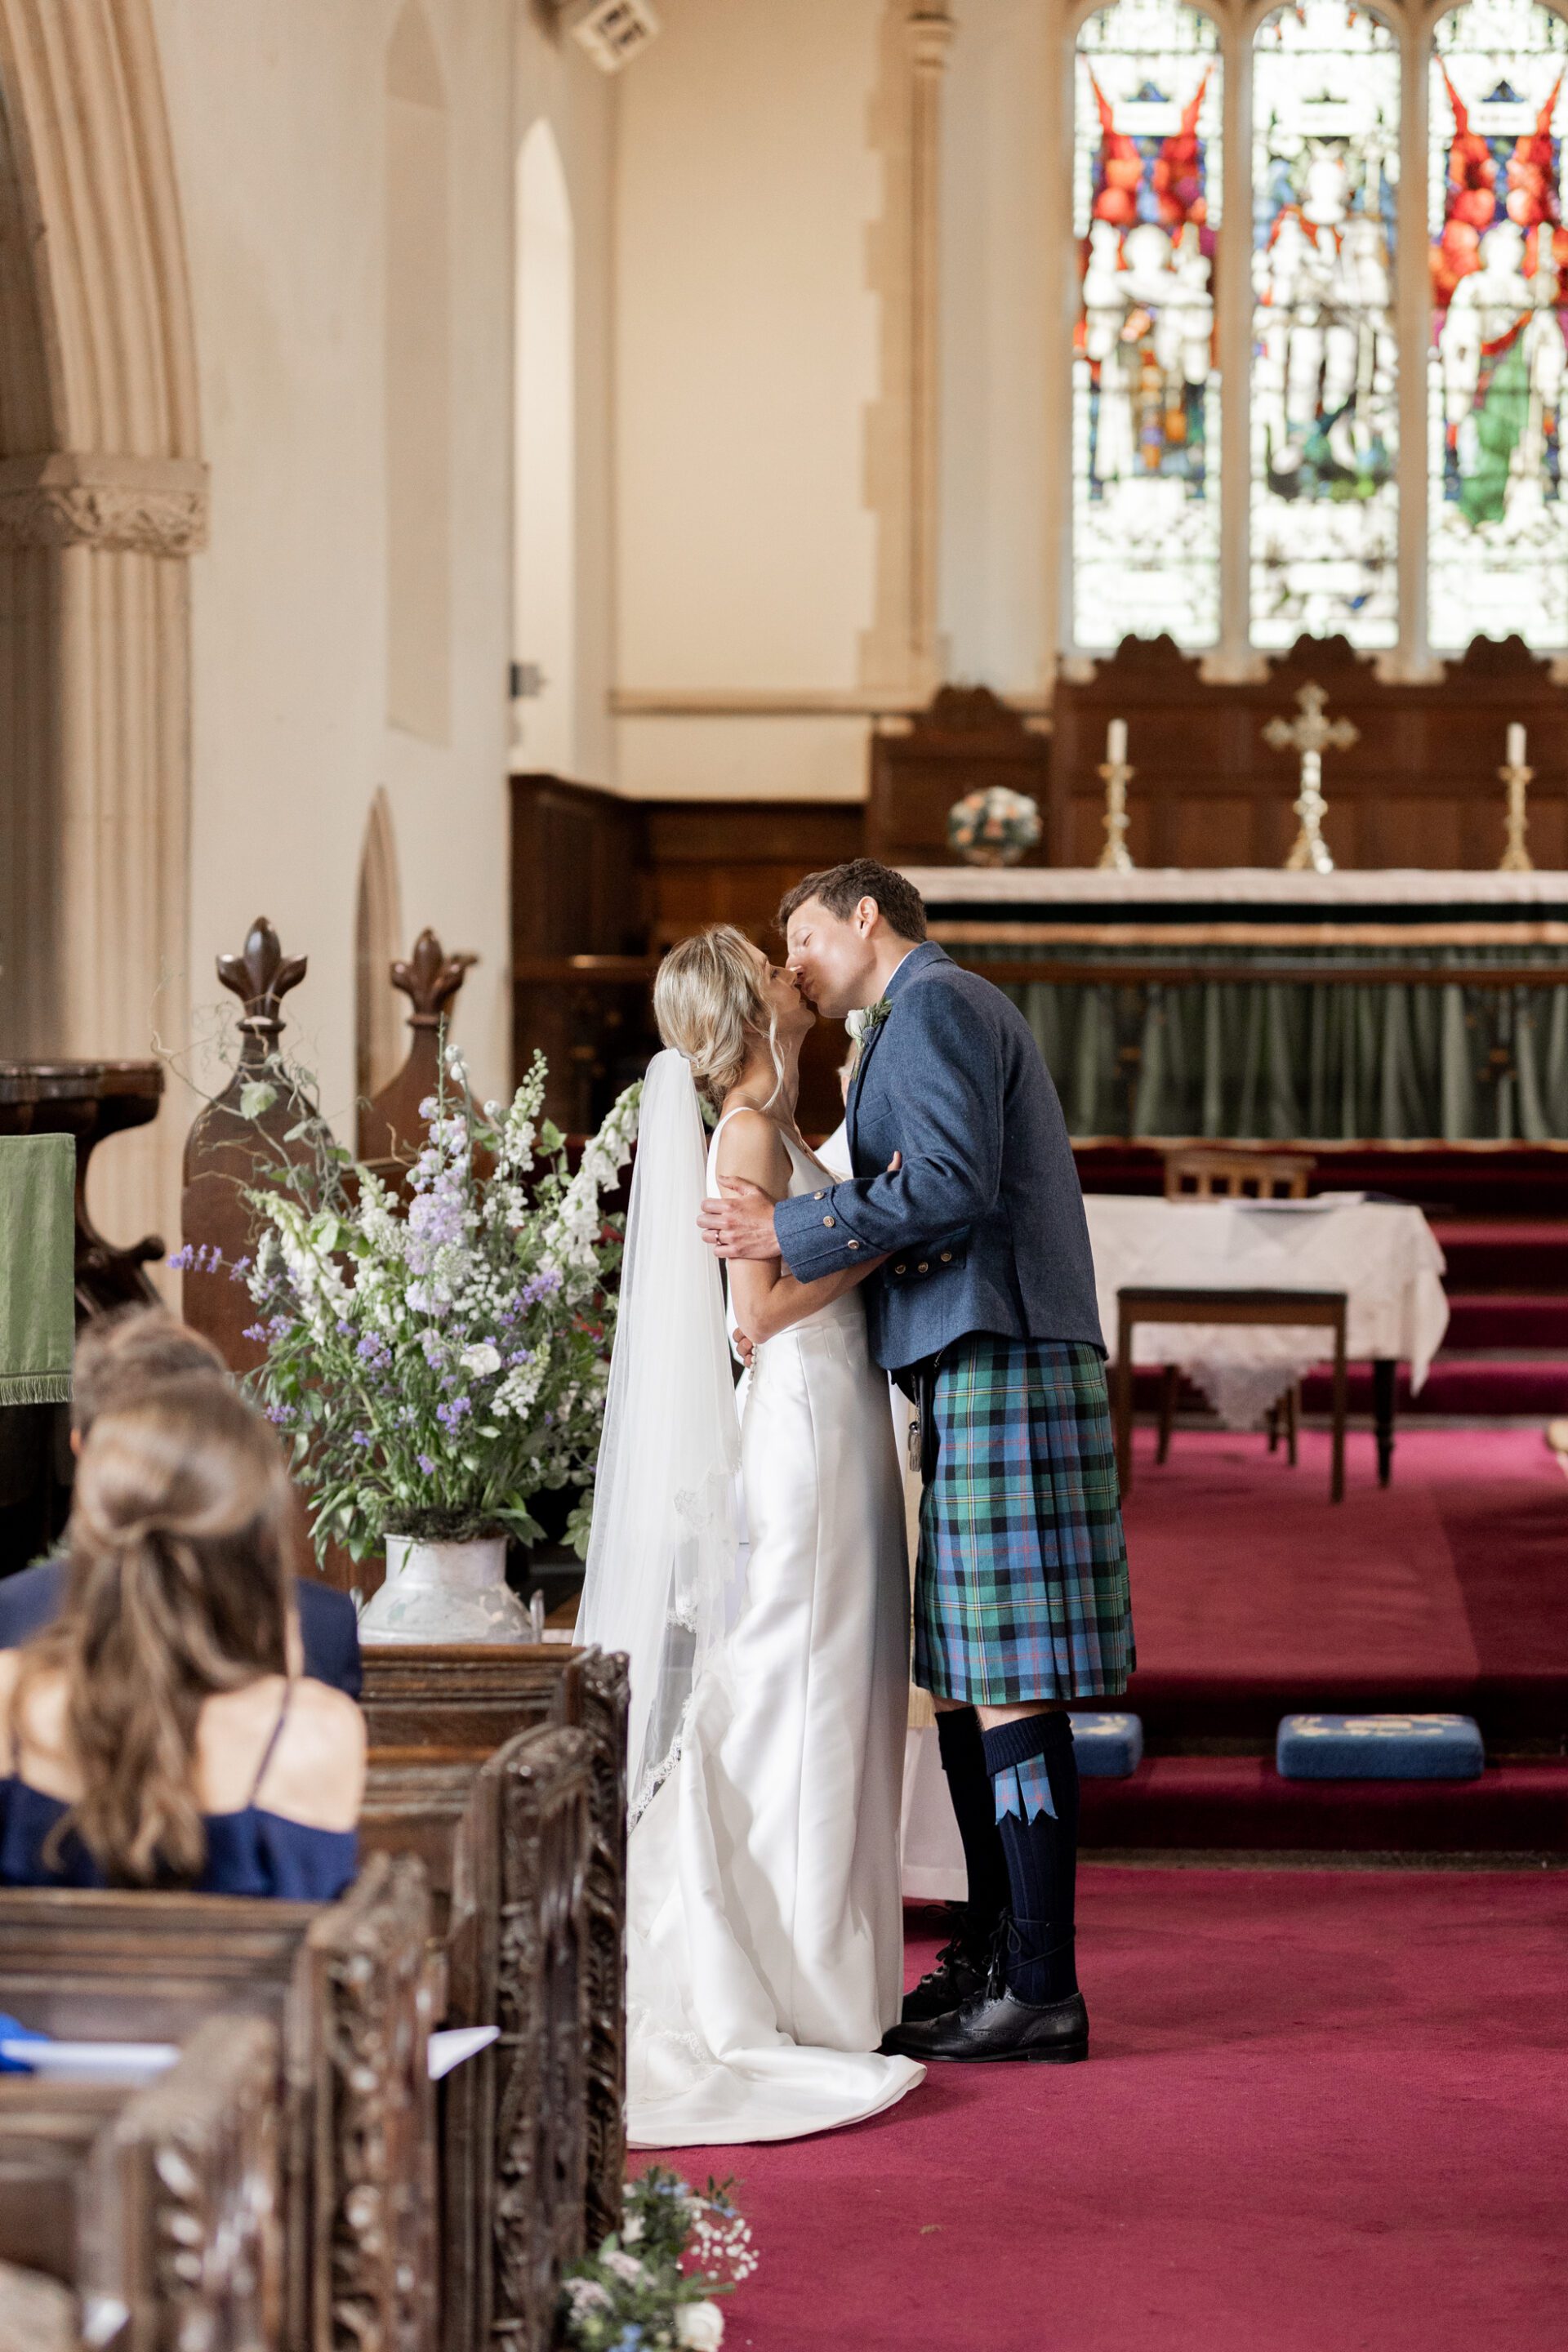 The bride and groom share their first kiss during their Devon church wedding ceremony